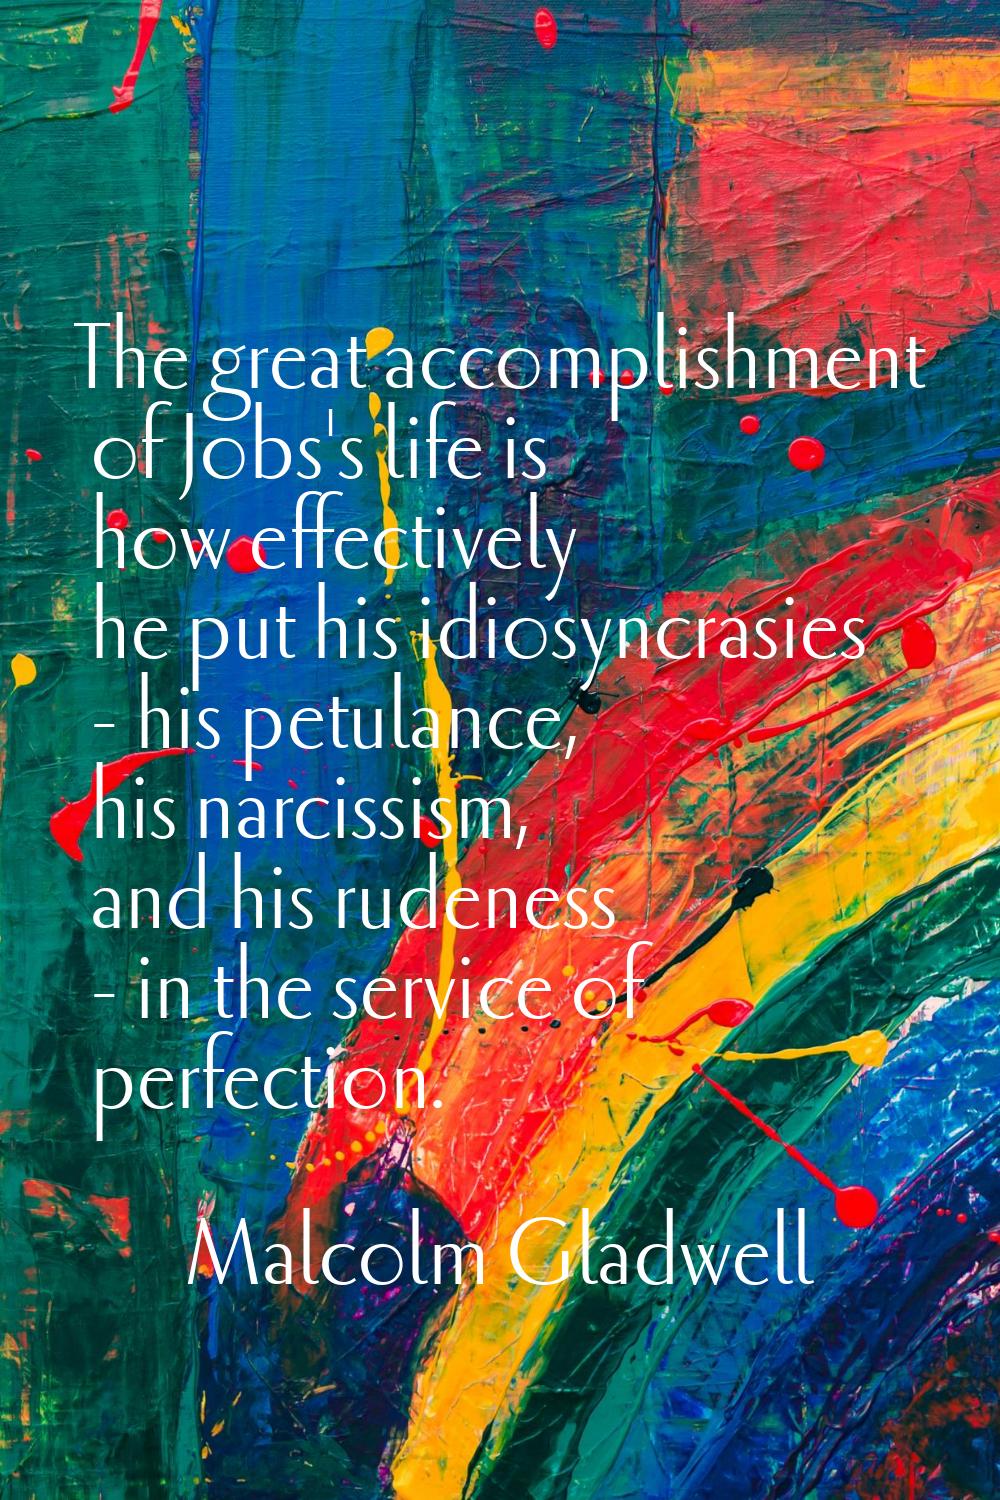 The great accomplishment of Jobs's life is how effectively he put his idiosyncrasies - his petulanc